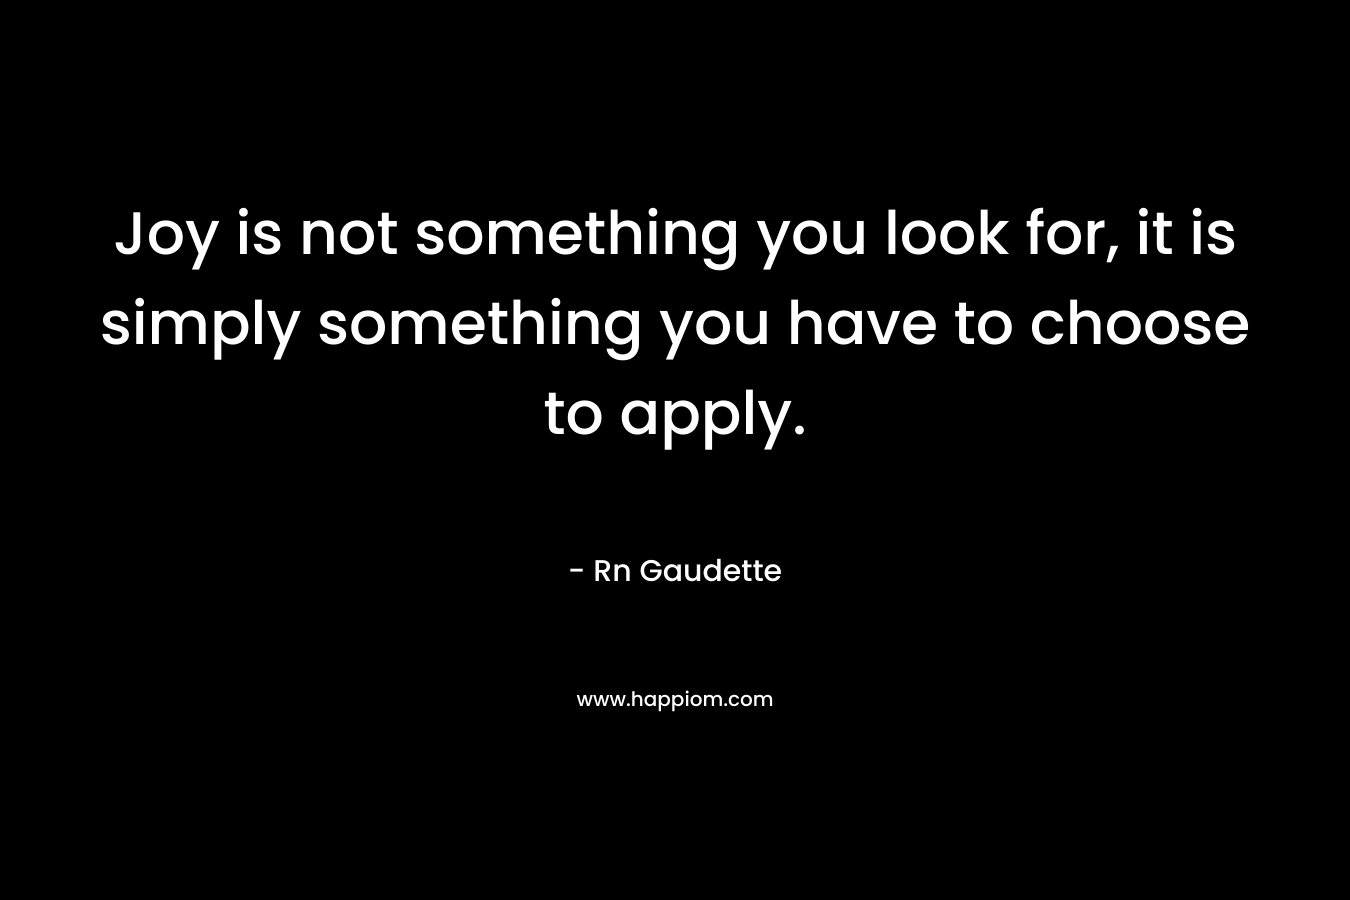 Joy is not something you look for, it is simply something you have to choose to apply. – Rn Gaudette